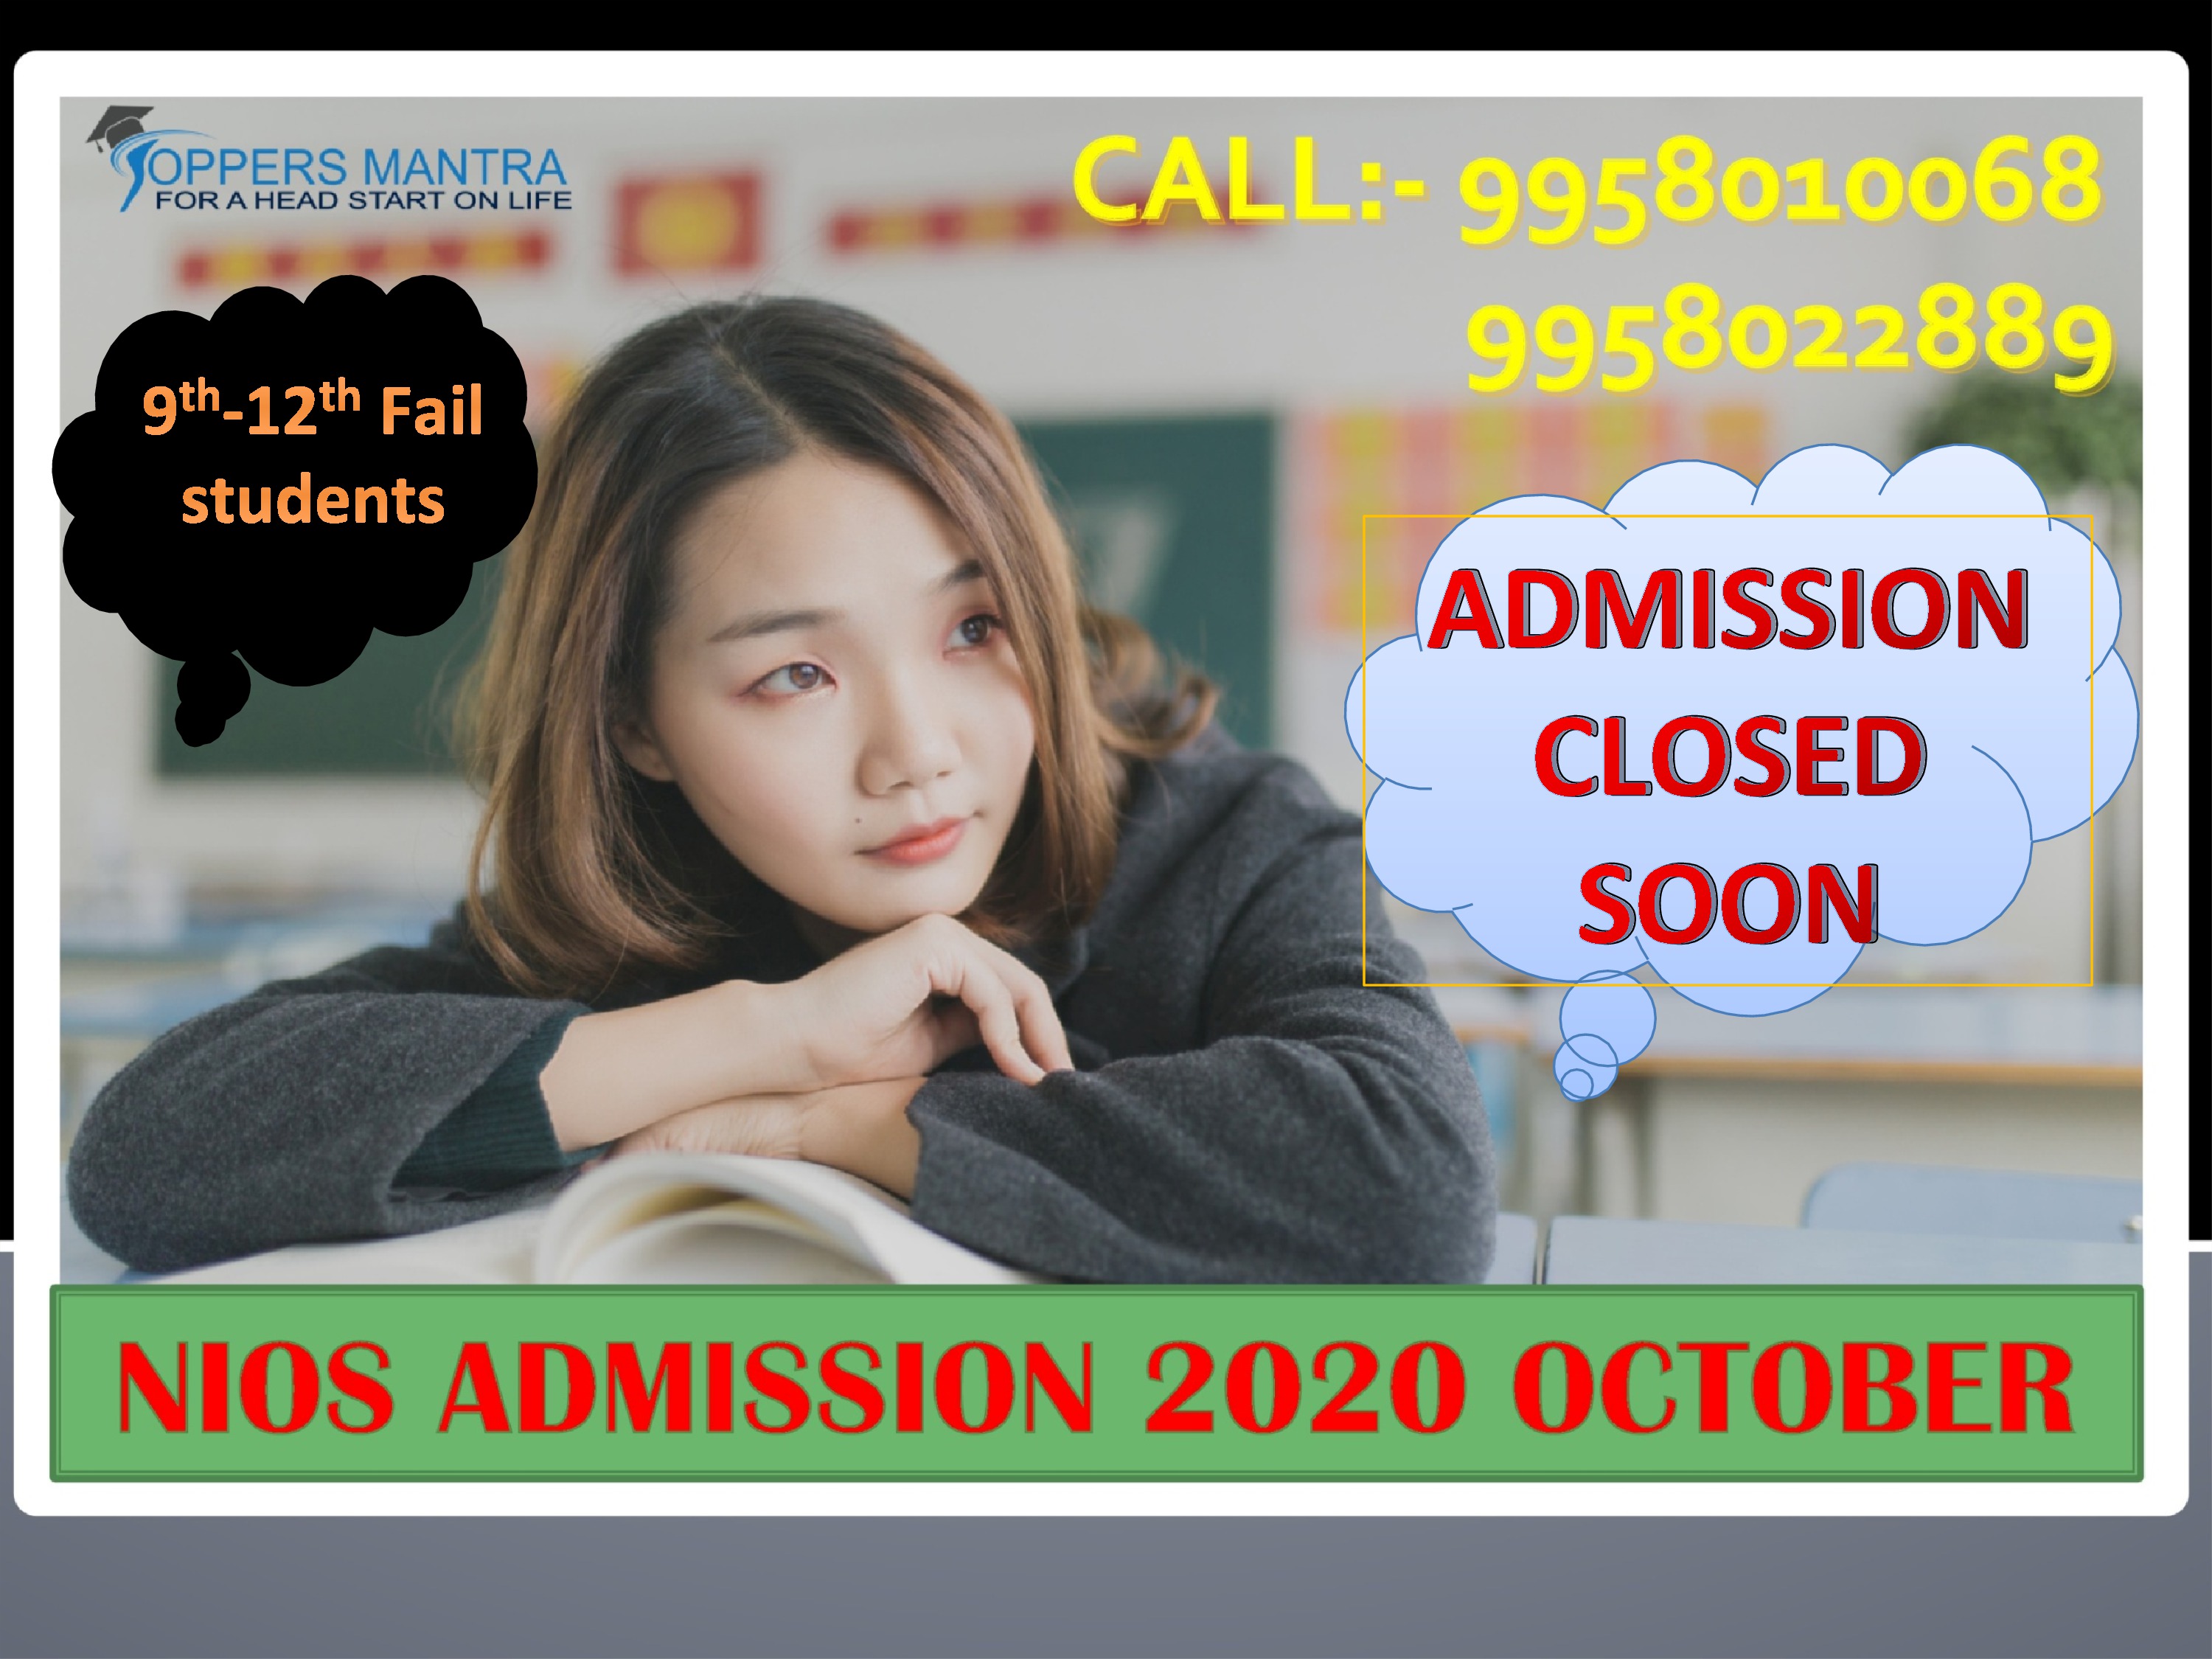 Nios last date for admission 2020 October